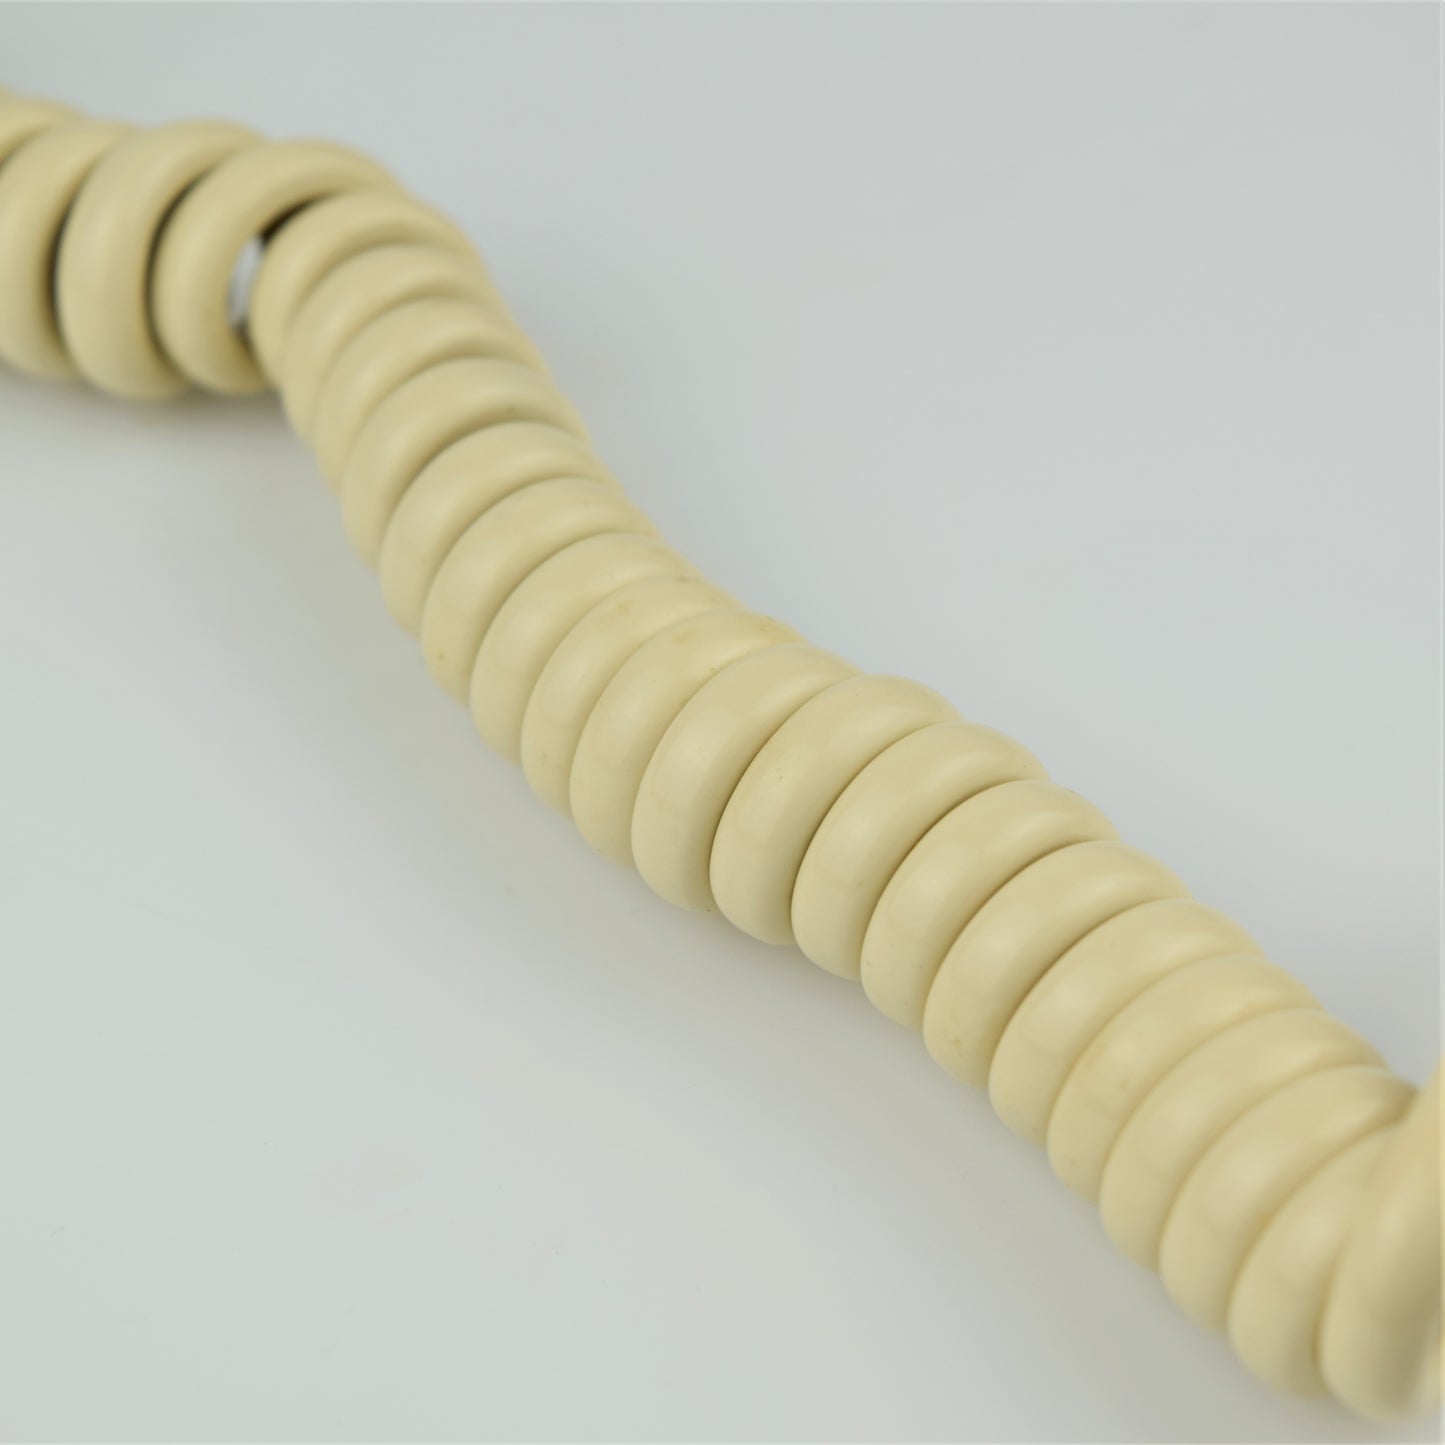 Cord - Handset - Ivory - Hardwired Curly - 4 Conductor - spade terminations.